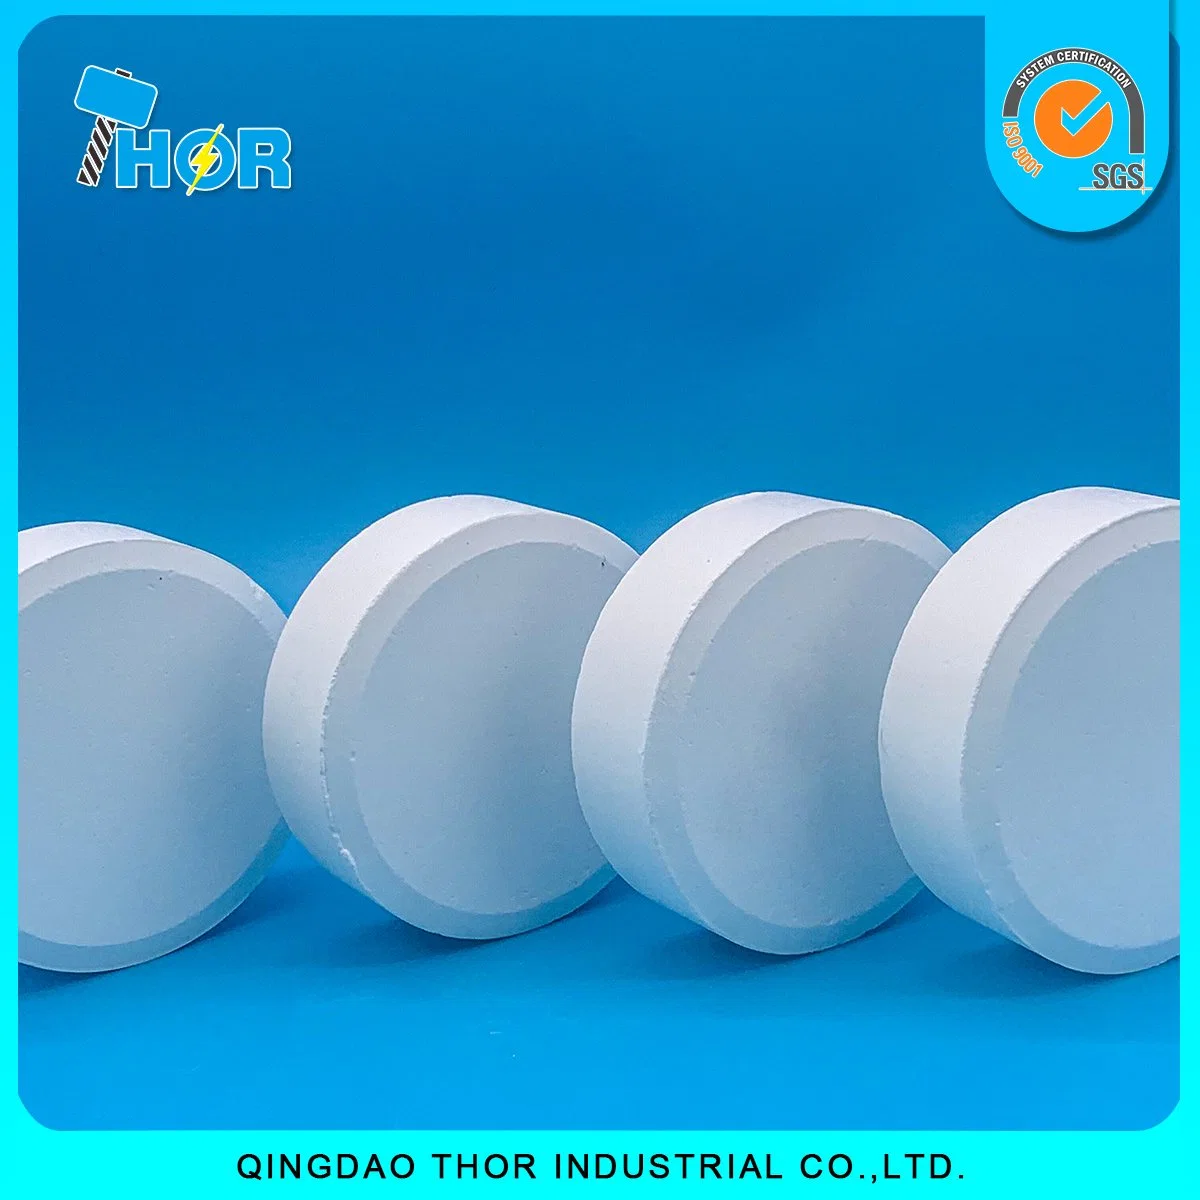 Factory Direct Sales, No Agency Fees. Swimming Pool Disinfectant Trichloroisocyanuric Acid TCCA 90% Tablets.